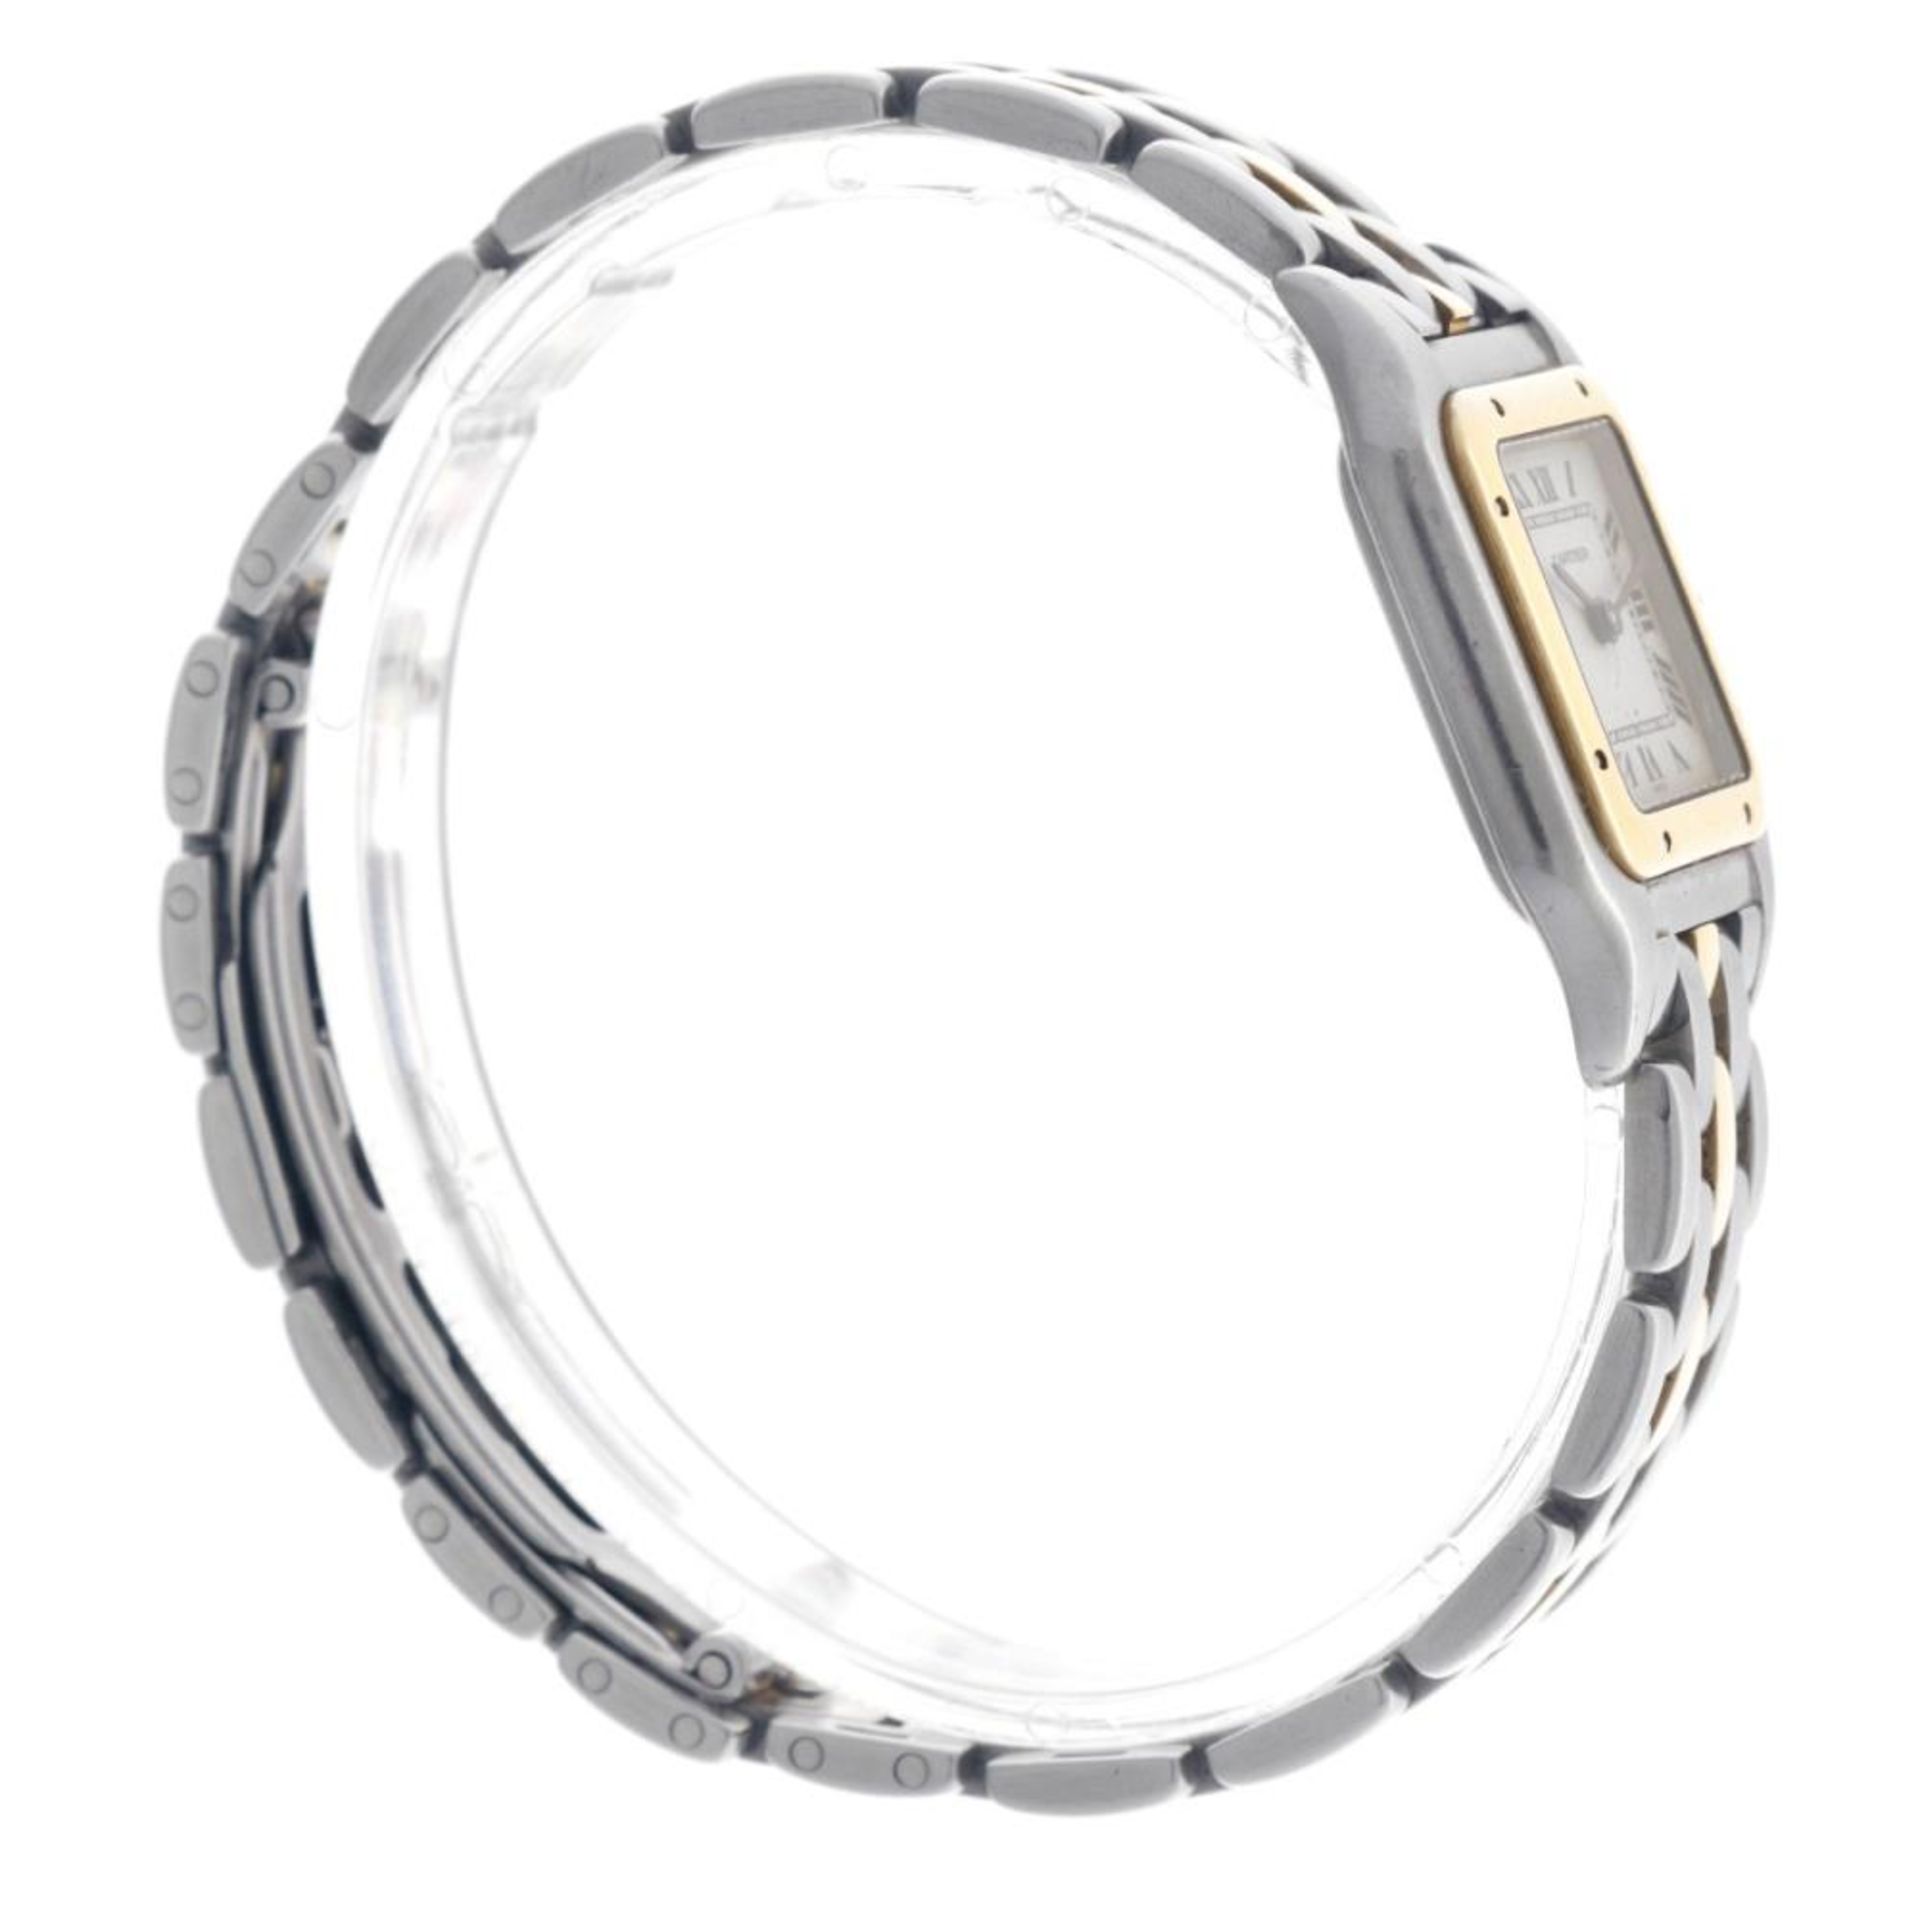 Cartier Panthere 166921 - Ladies watch - approx. 1989. - Image 8 of 12